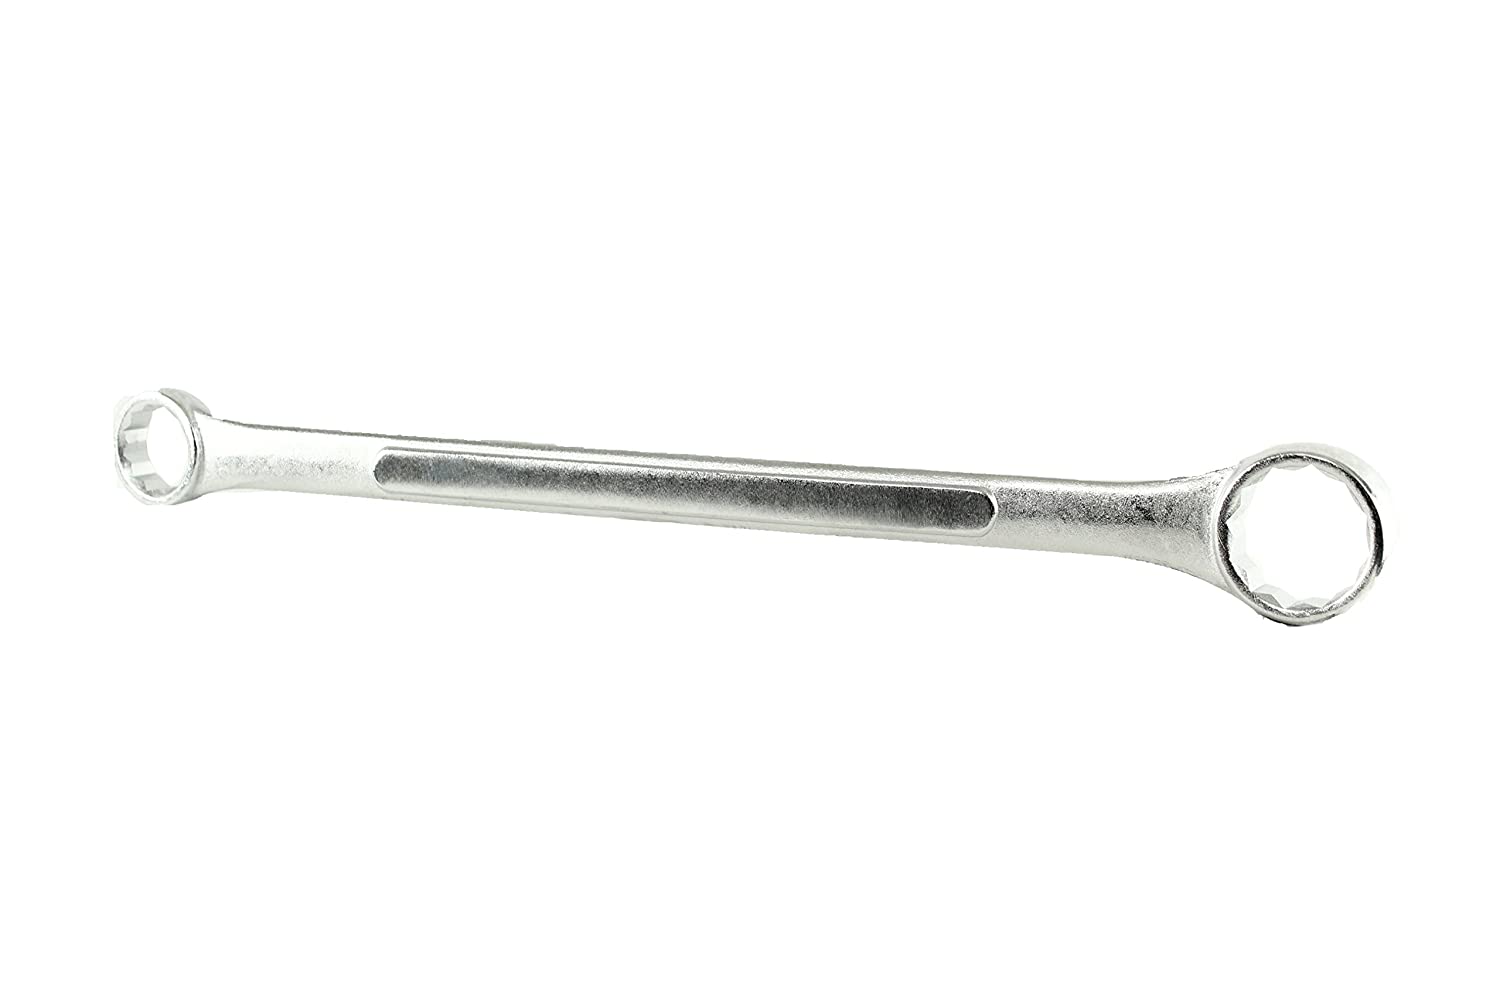 Uriah UT999100 Hitch Ball Wrench, For 1-1/2 in & 1-1/8 in Nuts, Steel